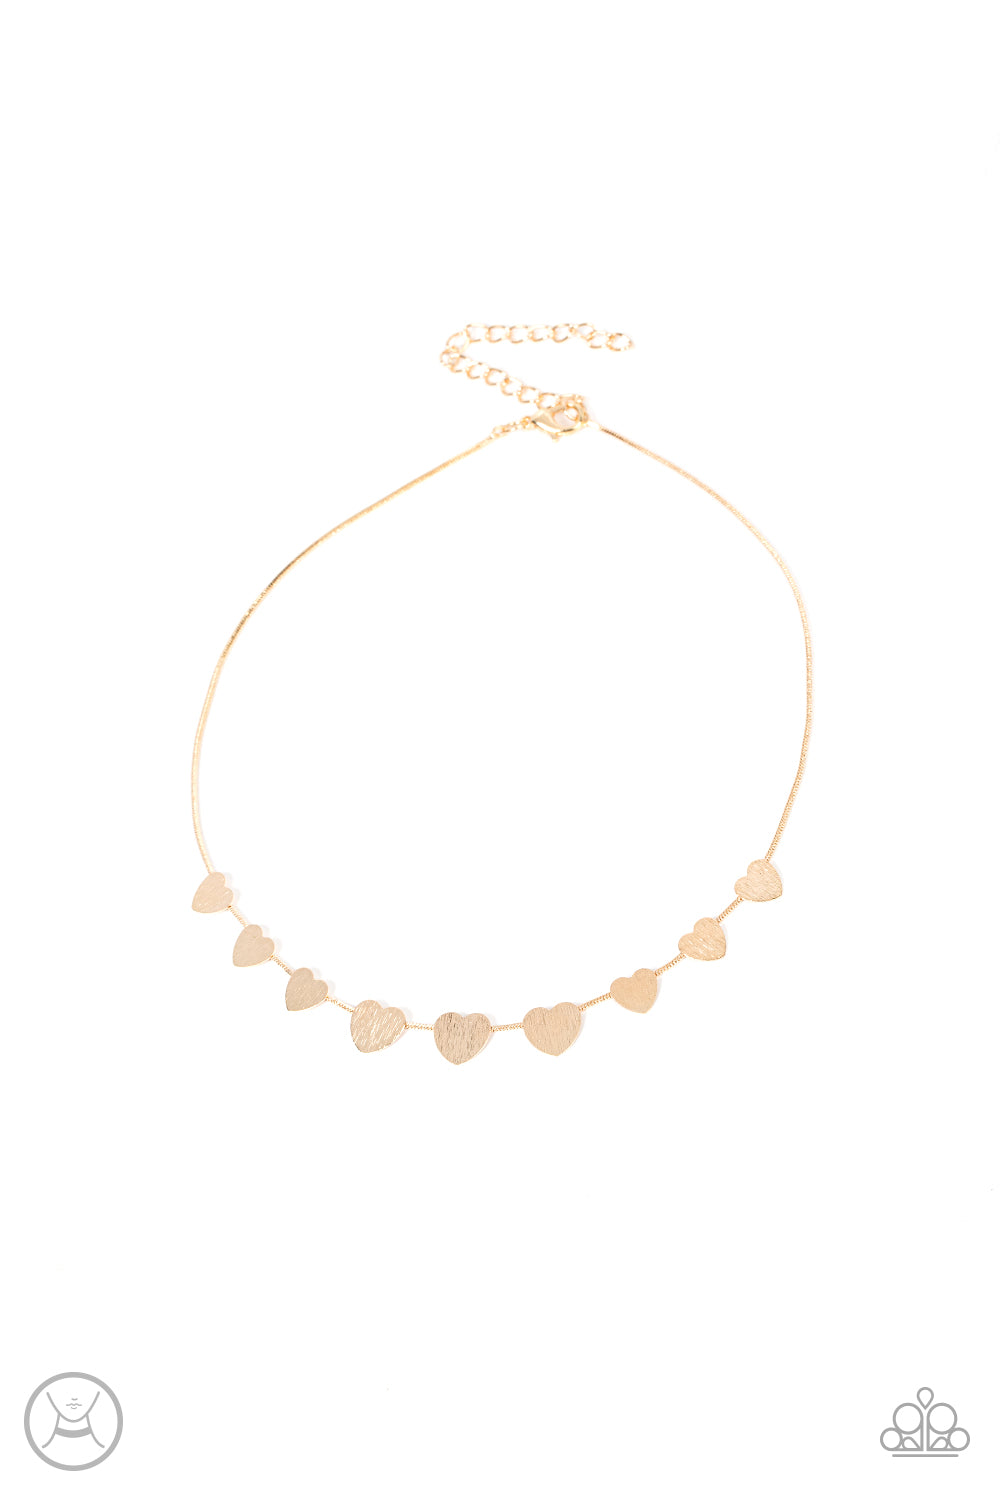 Paparazzi Accessories - Dainty Desire - Gold Necklace Choker